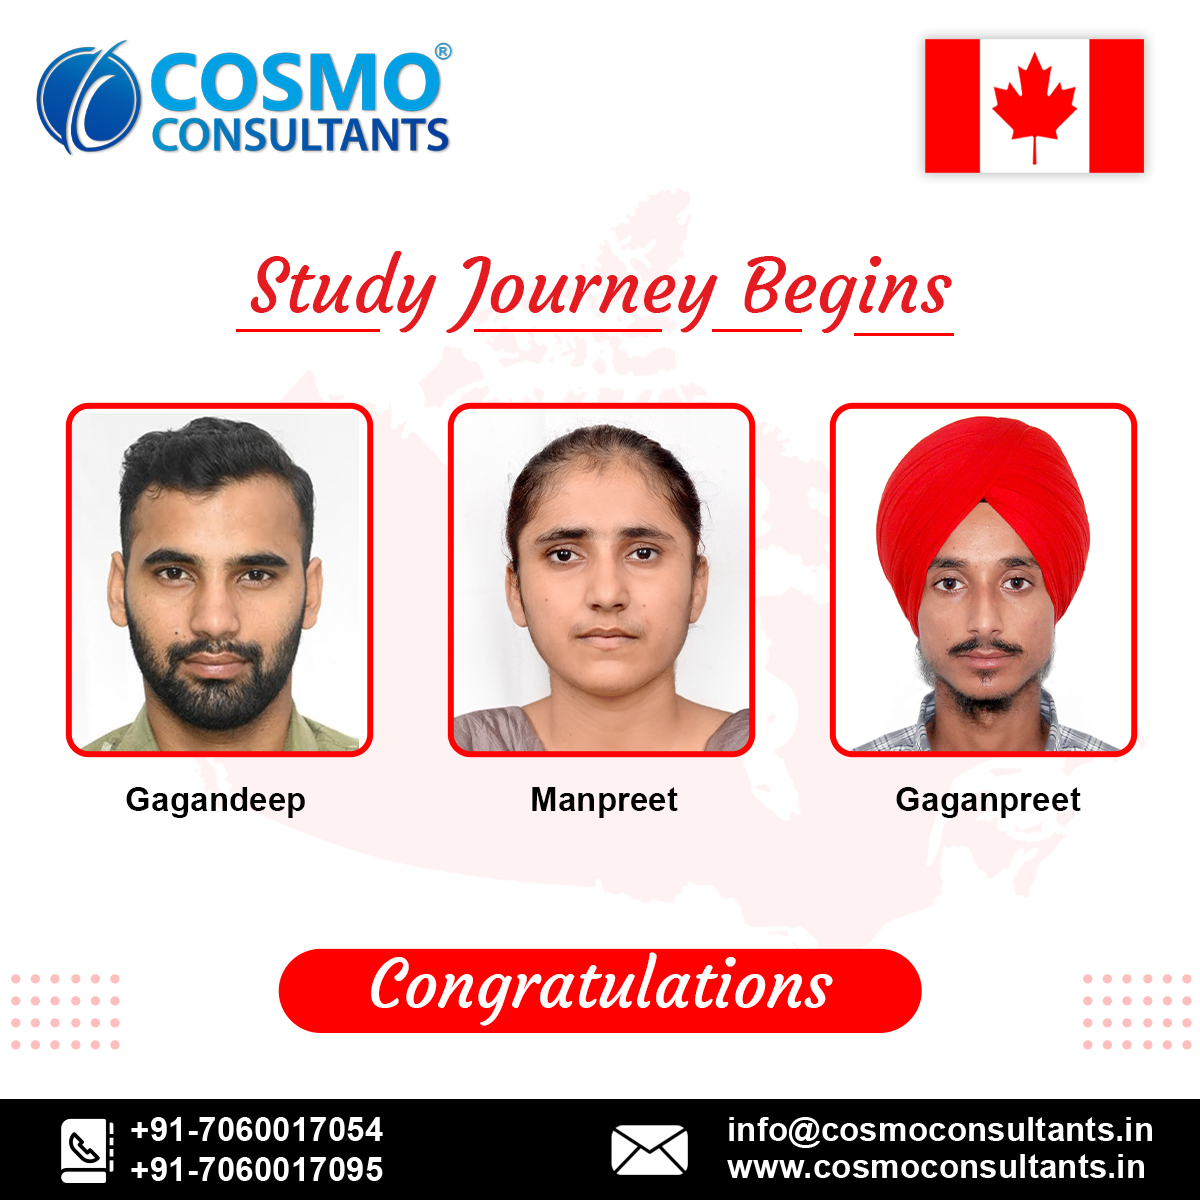 Team Cosmo Congratulates all these students and wishes them a Bright and Successful future. For more information reach us: +91-7060017054, +91-7060017095. #CosmoConsultants #Canada #StudyInCanada #StudyAbroad #studentvisa #studyvisa #canadavisa #education #canadaimmigration